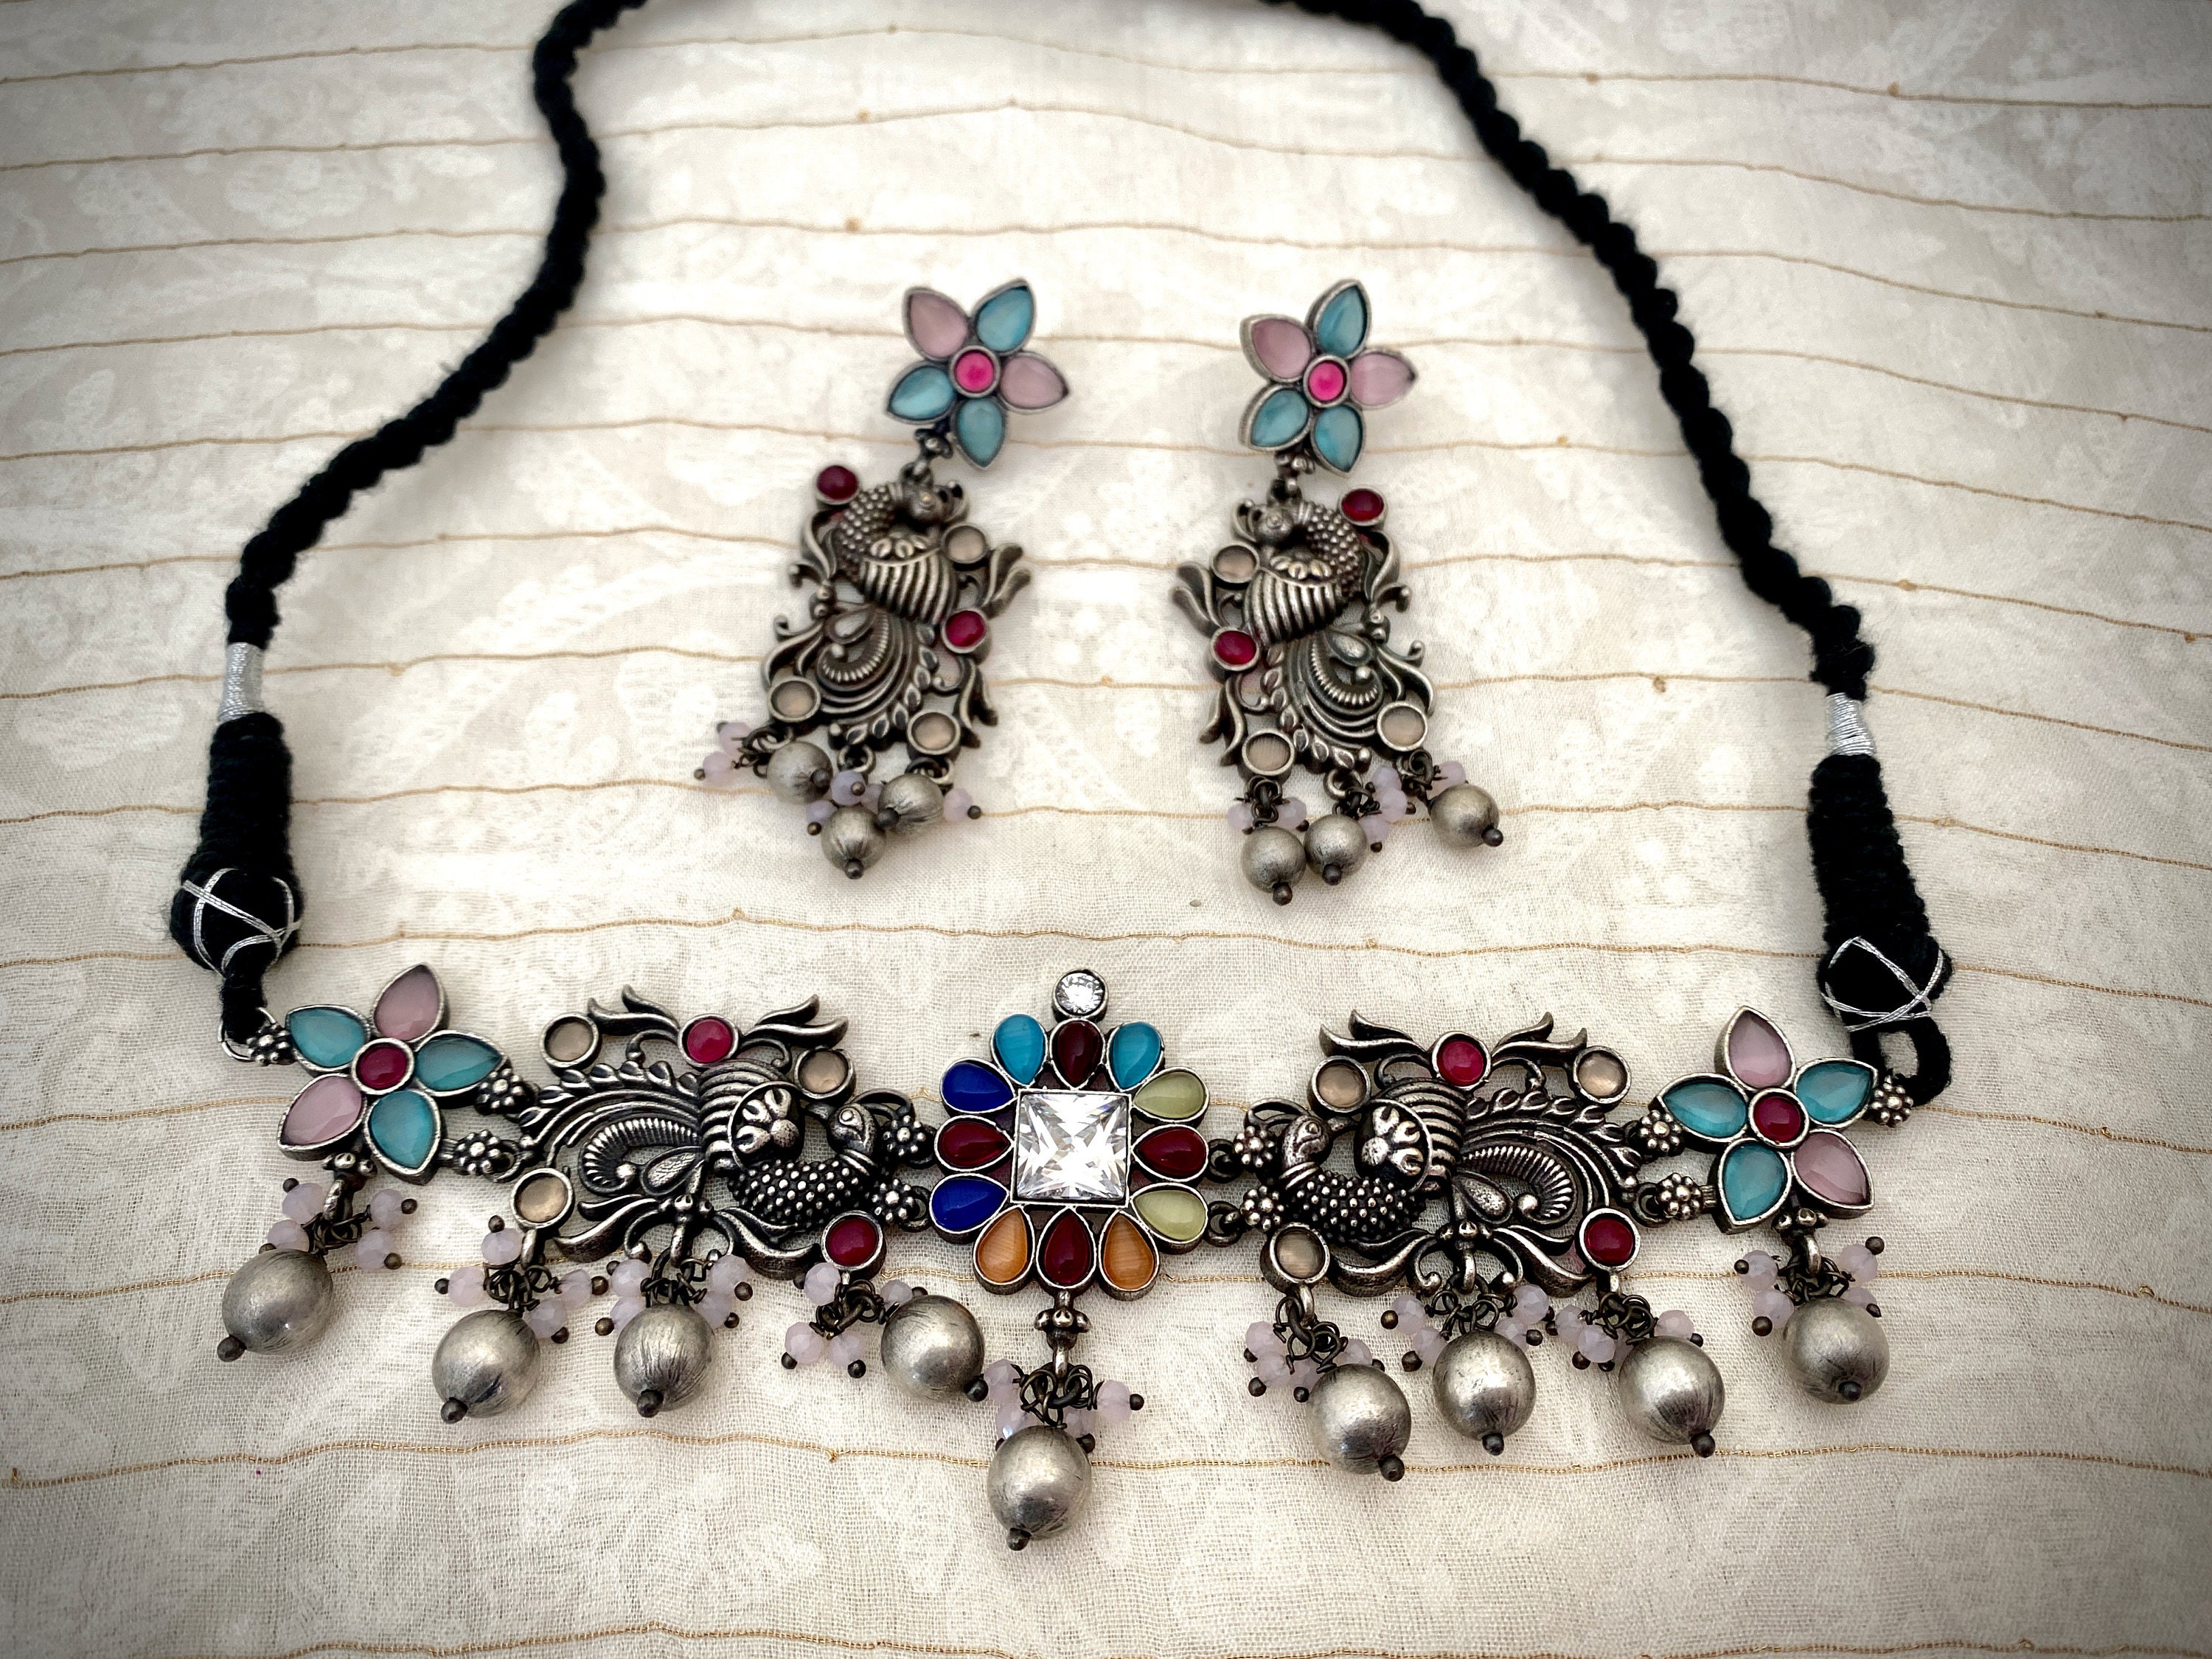 Boho,Indian Jewelry Peacock Necklace Bollywood Style Silver Oxidised Jewellery 